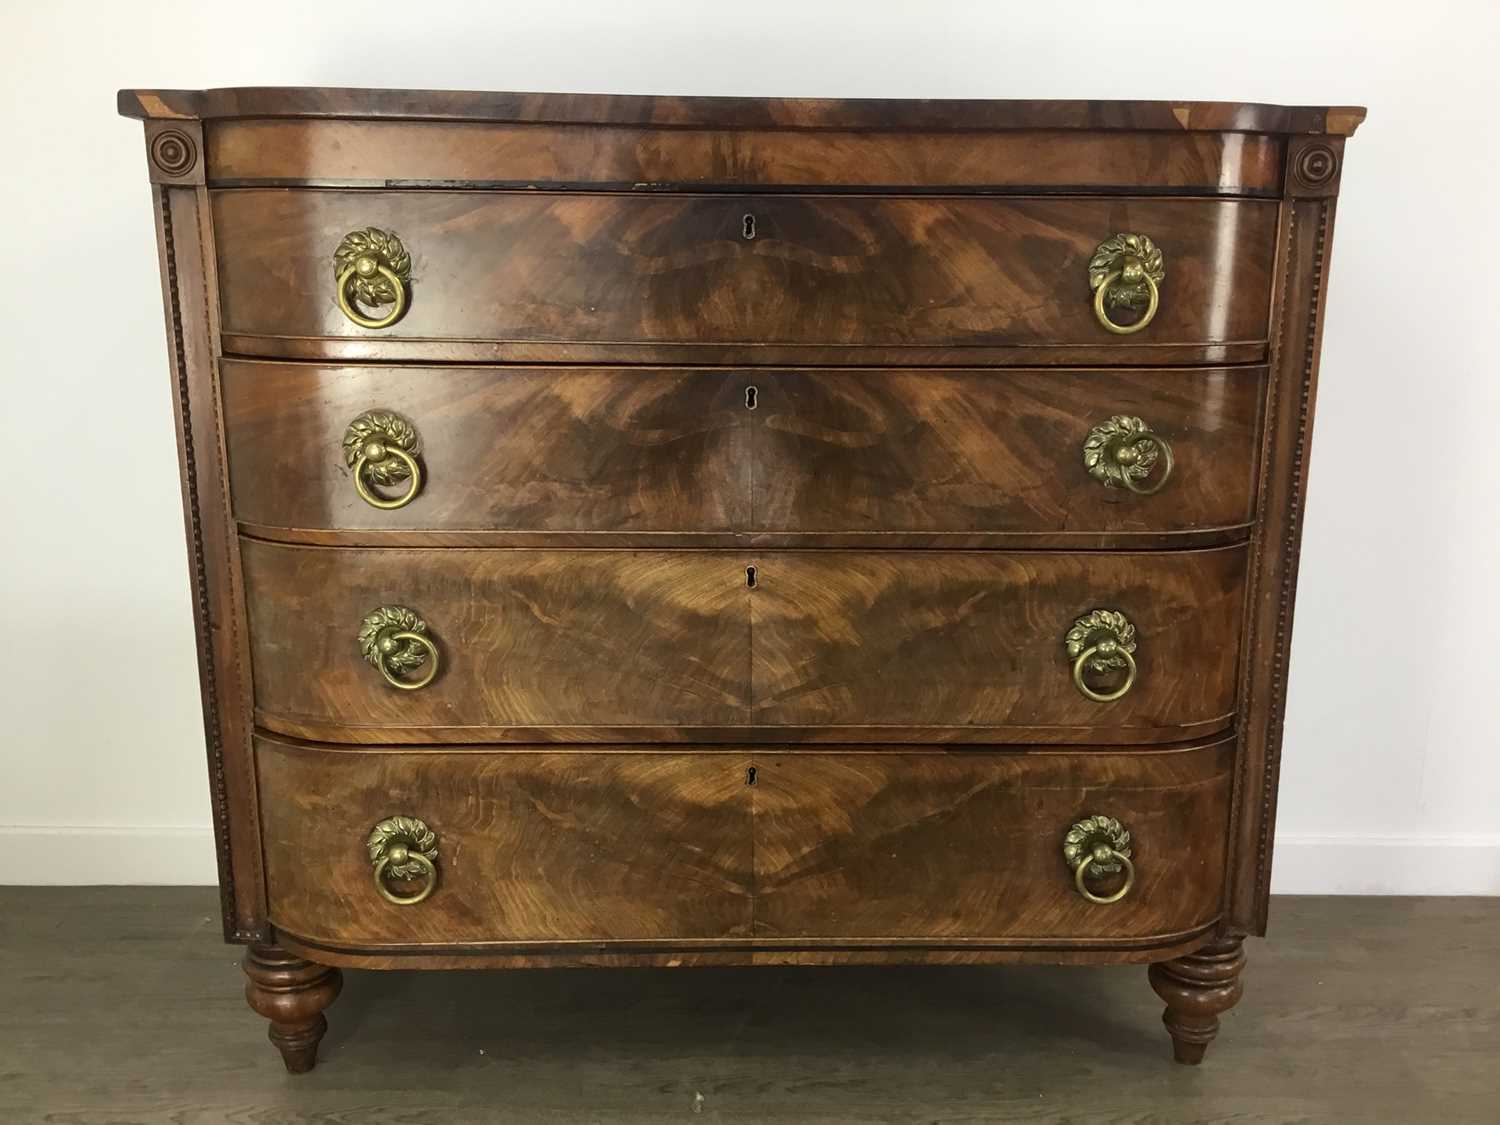 MAHOGANY BOW FRONTED CHEST, EARLY 19TH CENTURY